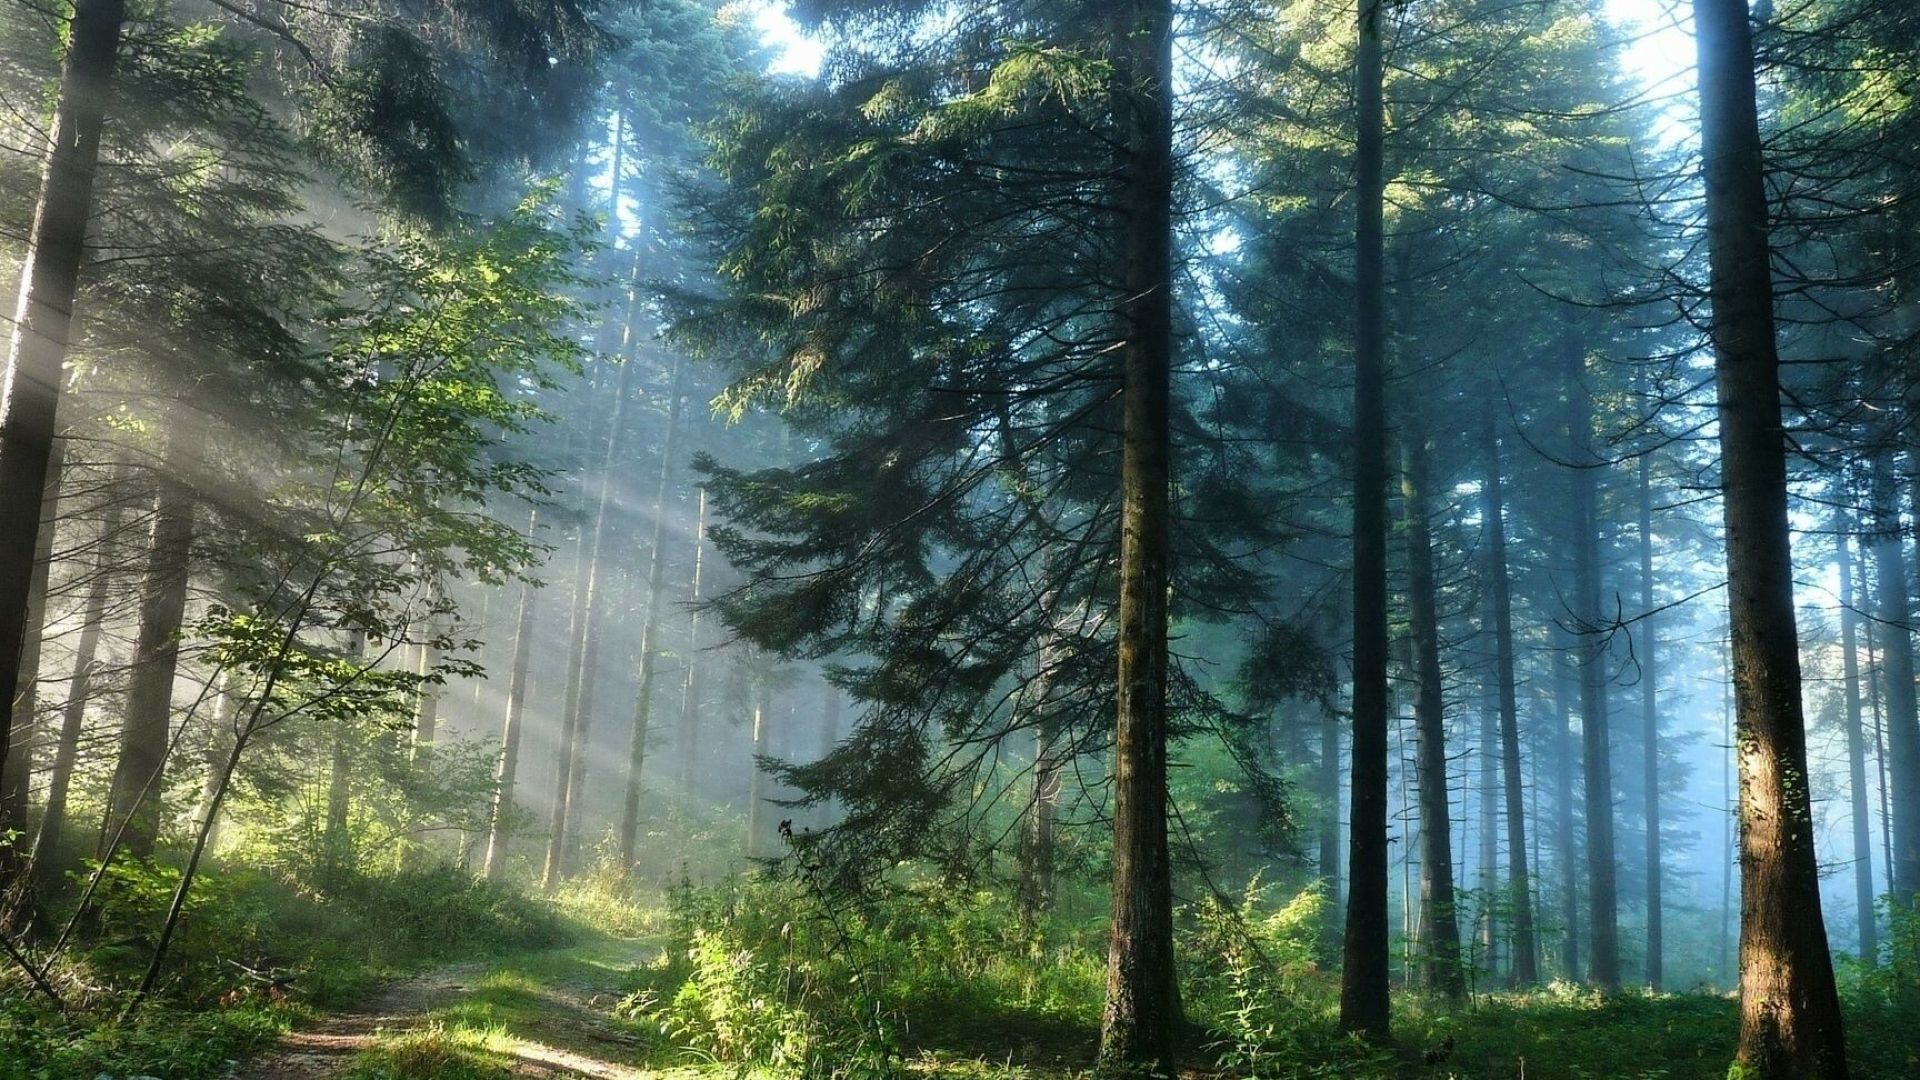 Forest: A complex ecological system in which trees are the dominant life-form. 1920x1080 Full HD Wallpaper.